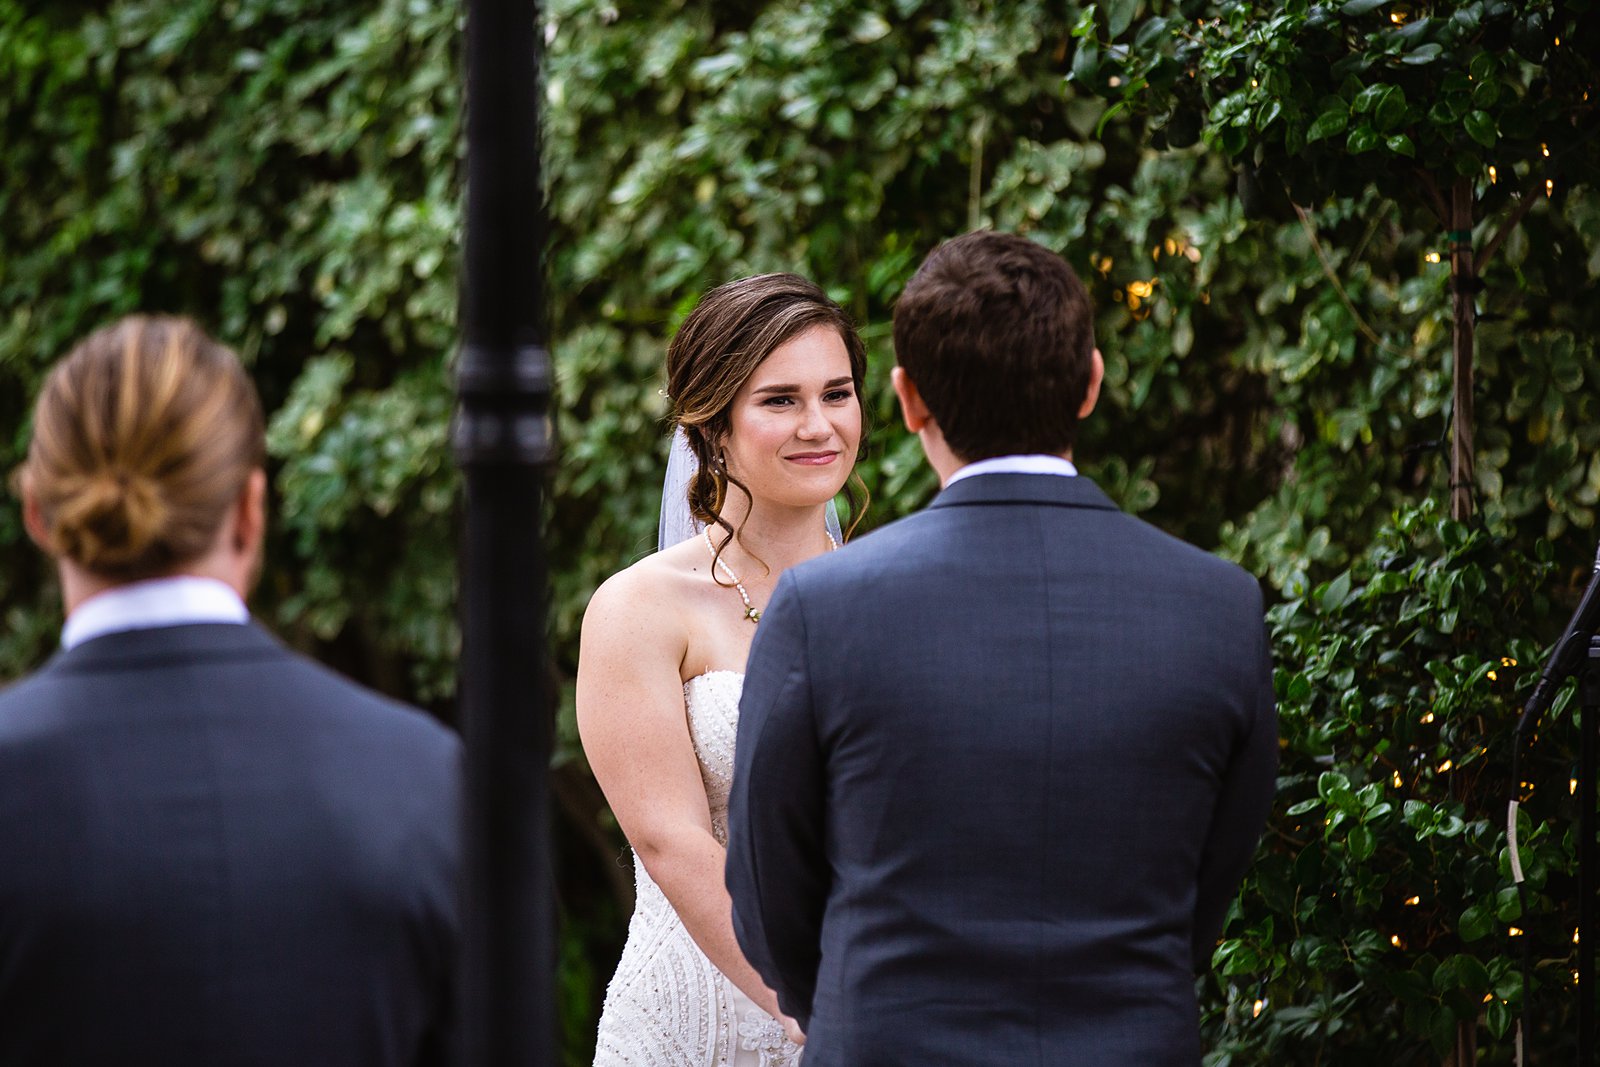 Bride looking at her groom during their wedding ceremony at The Wright House by Mesa wedding photographer PMA Photography.